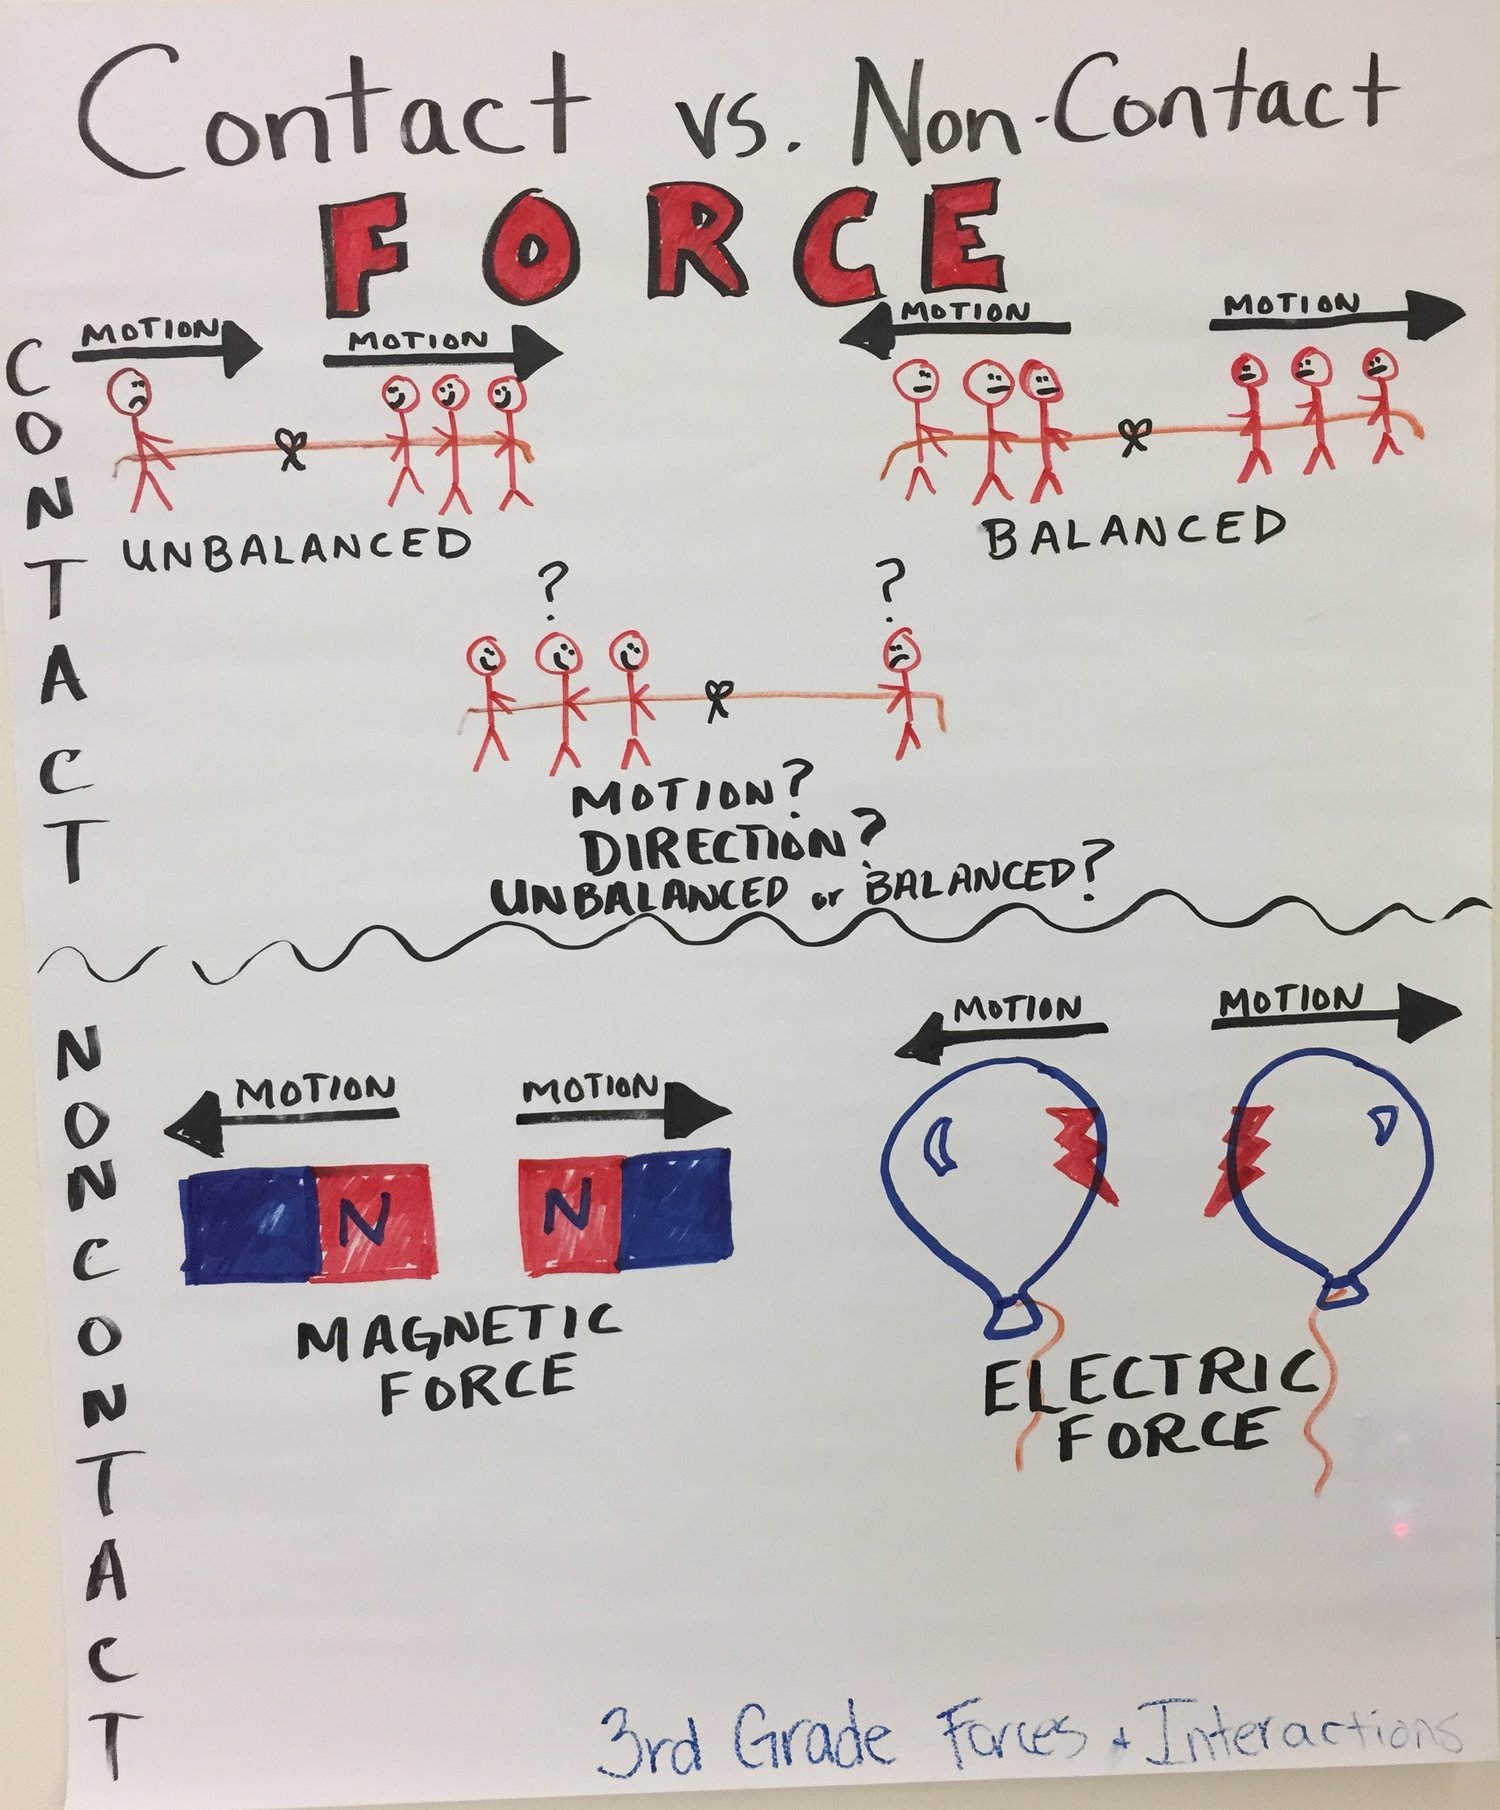 Forces and Interactions - The Wonder of Science.